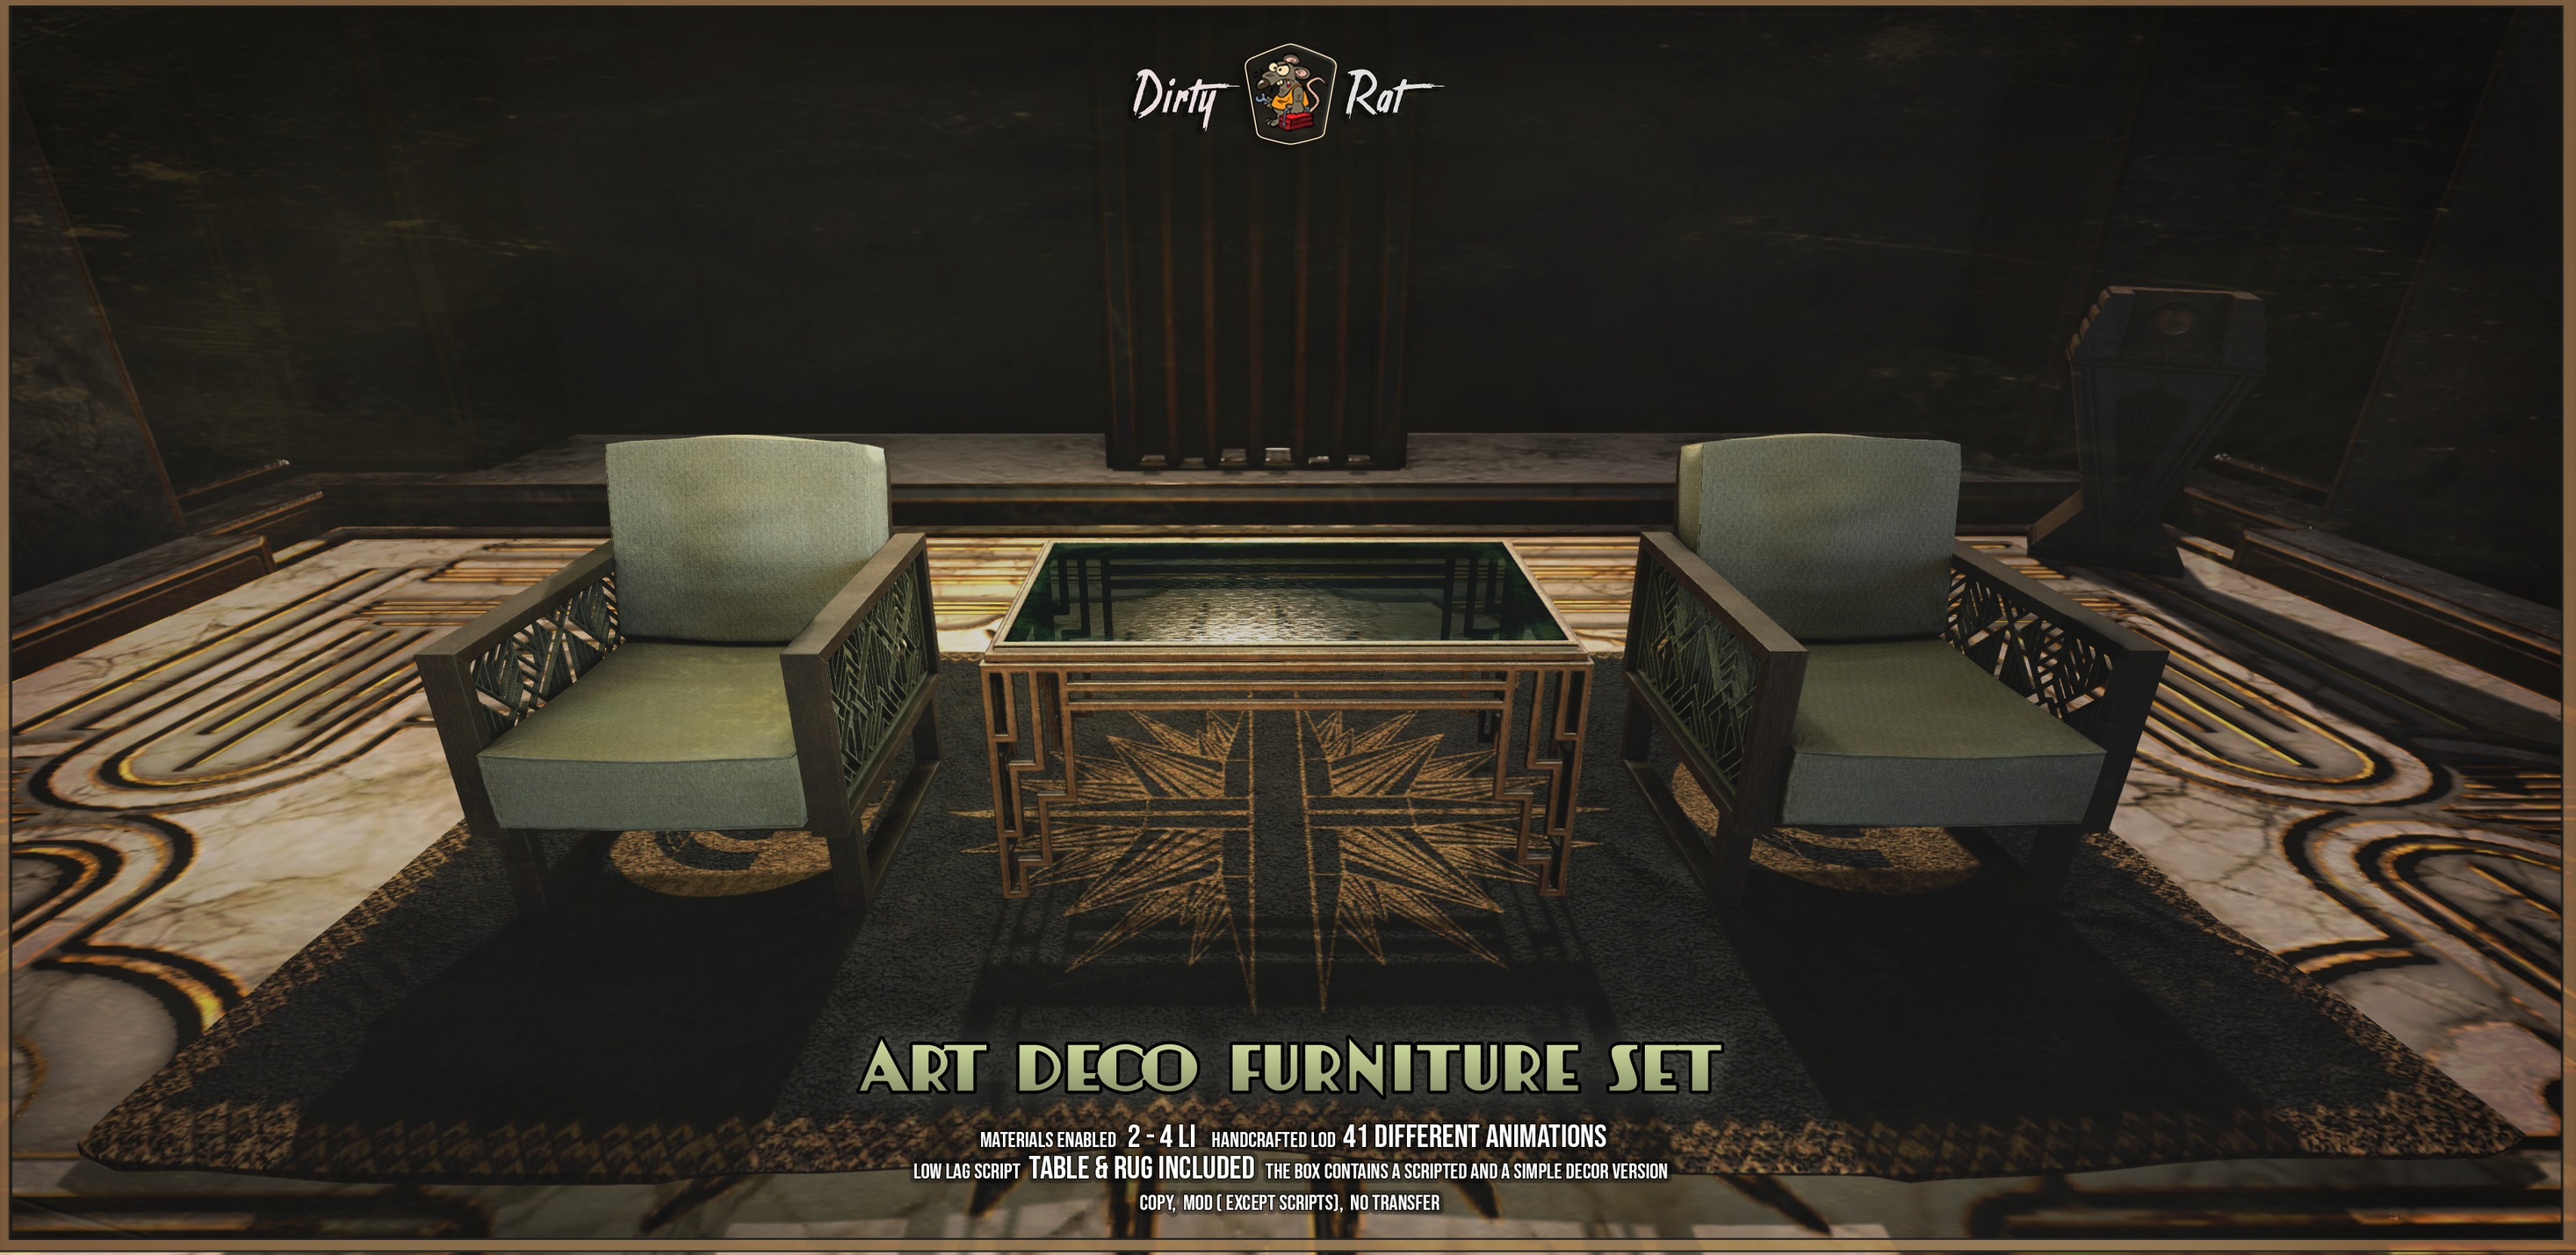 Dirty Rat – Art Deco Collection